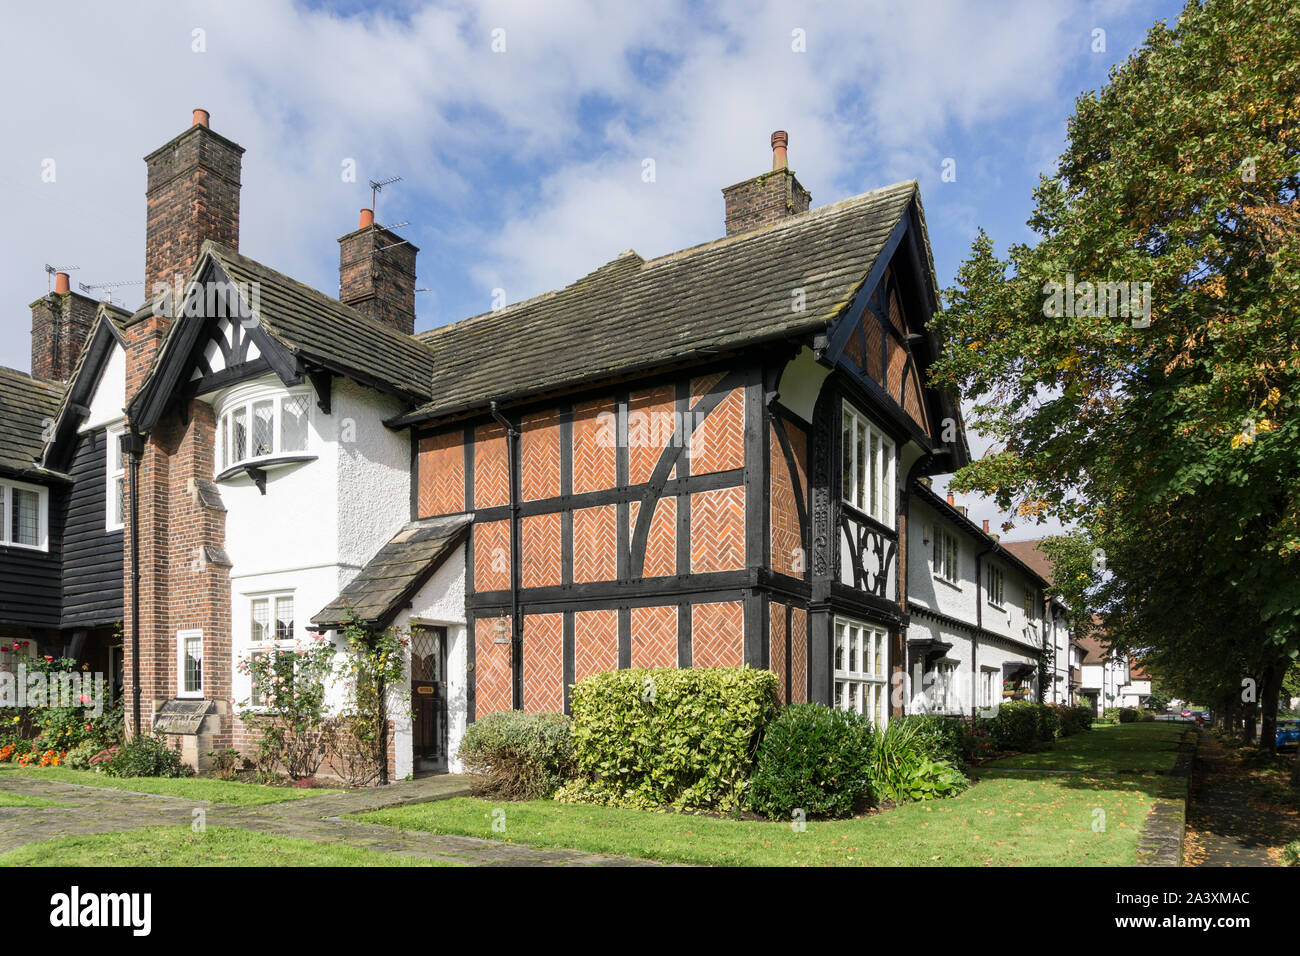 Houses in the model village of Port Sunlight, Wirral, Merseyside, UK; originally built by Lever Bros for their factory workers. Stock Photo